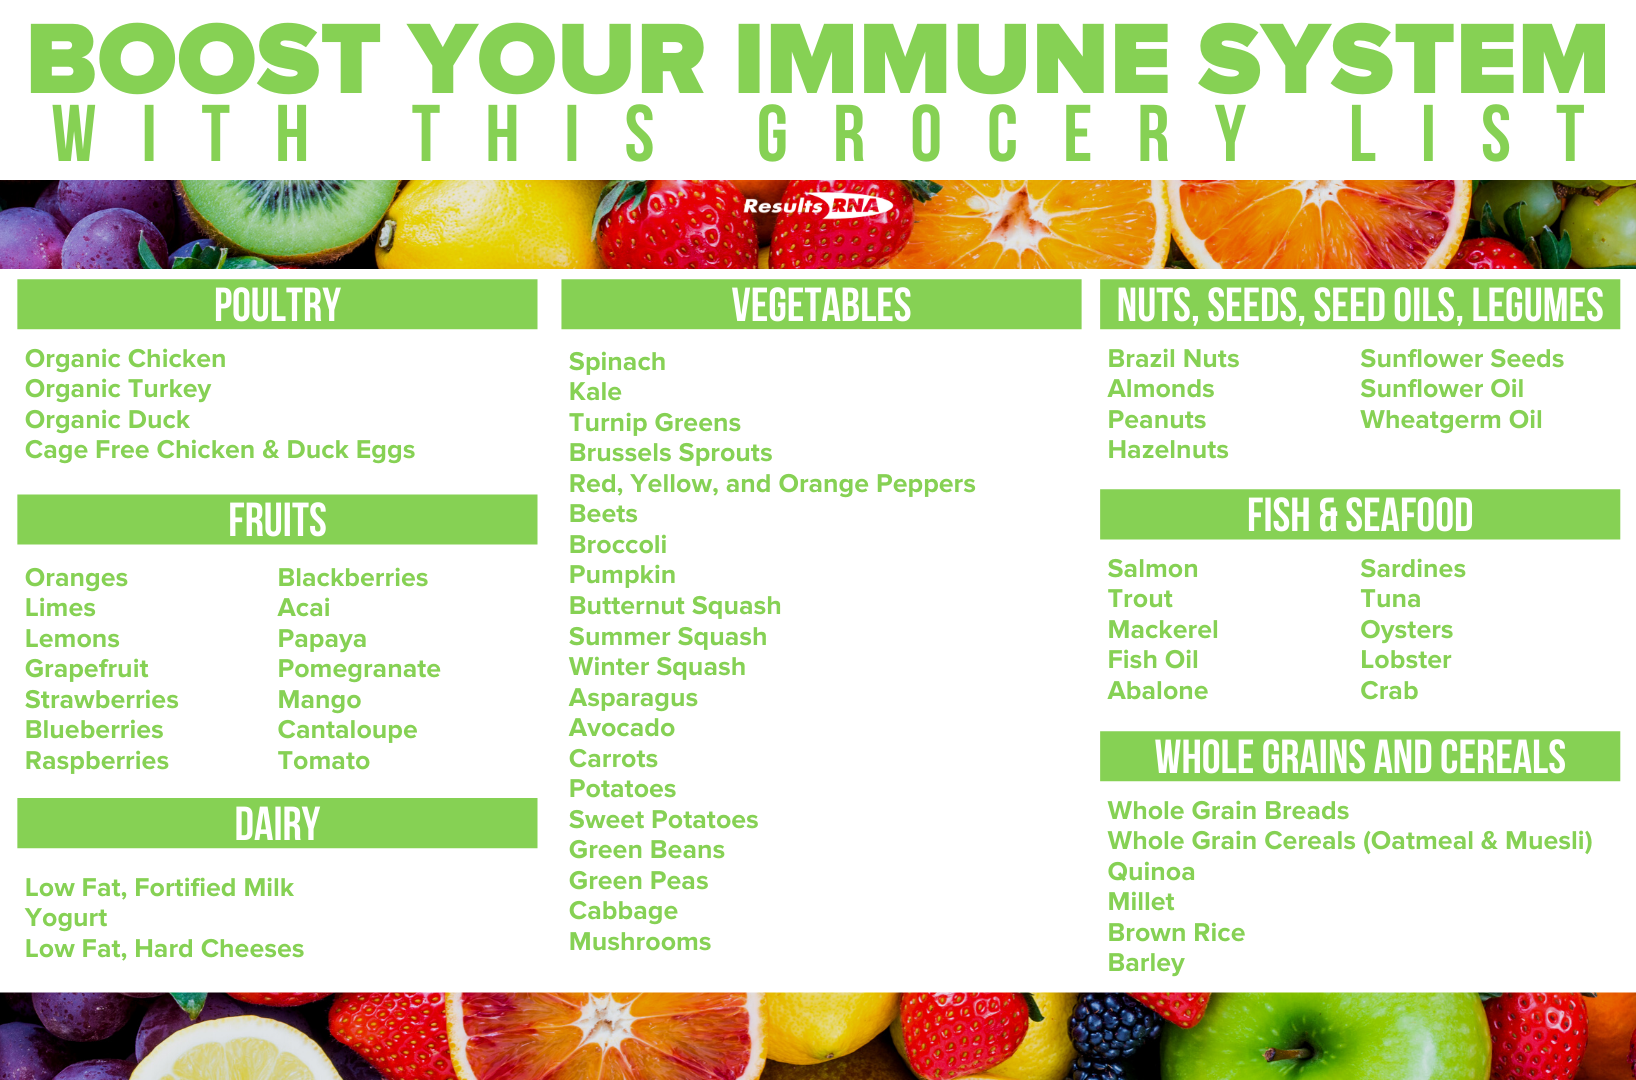 Grocery list of foods to boost the immune system